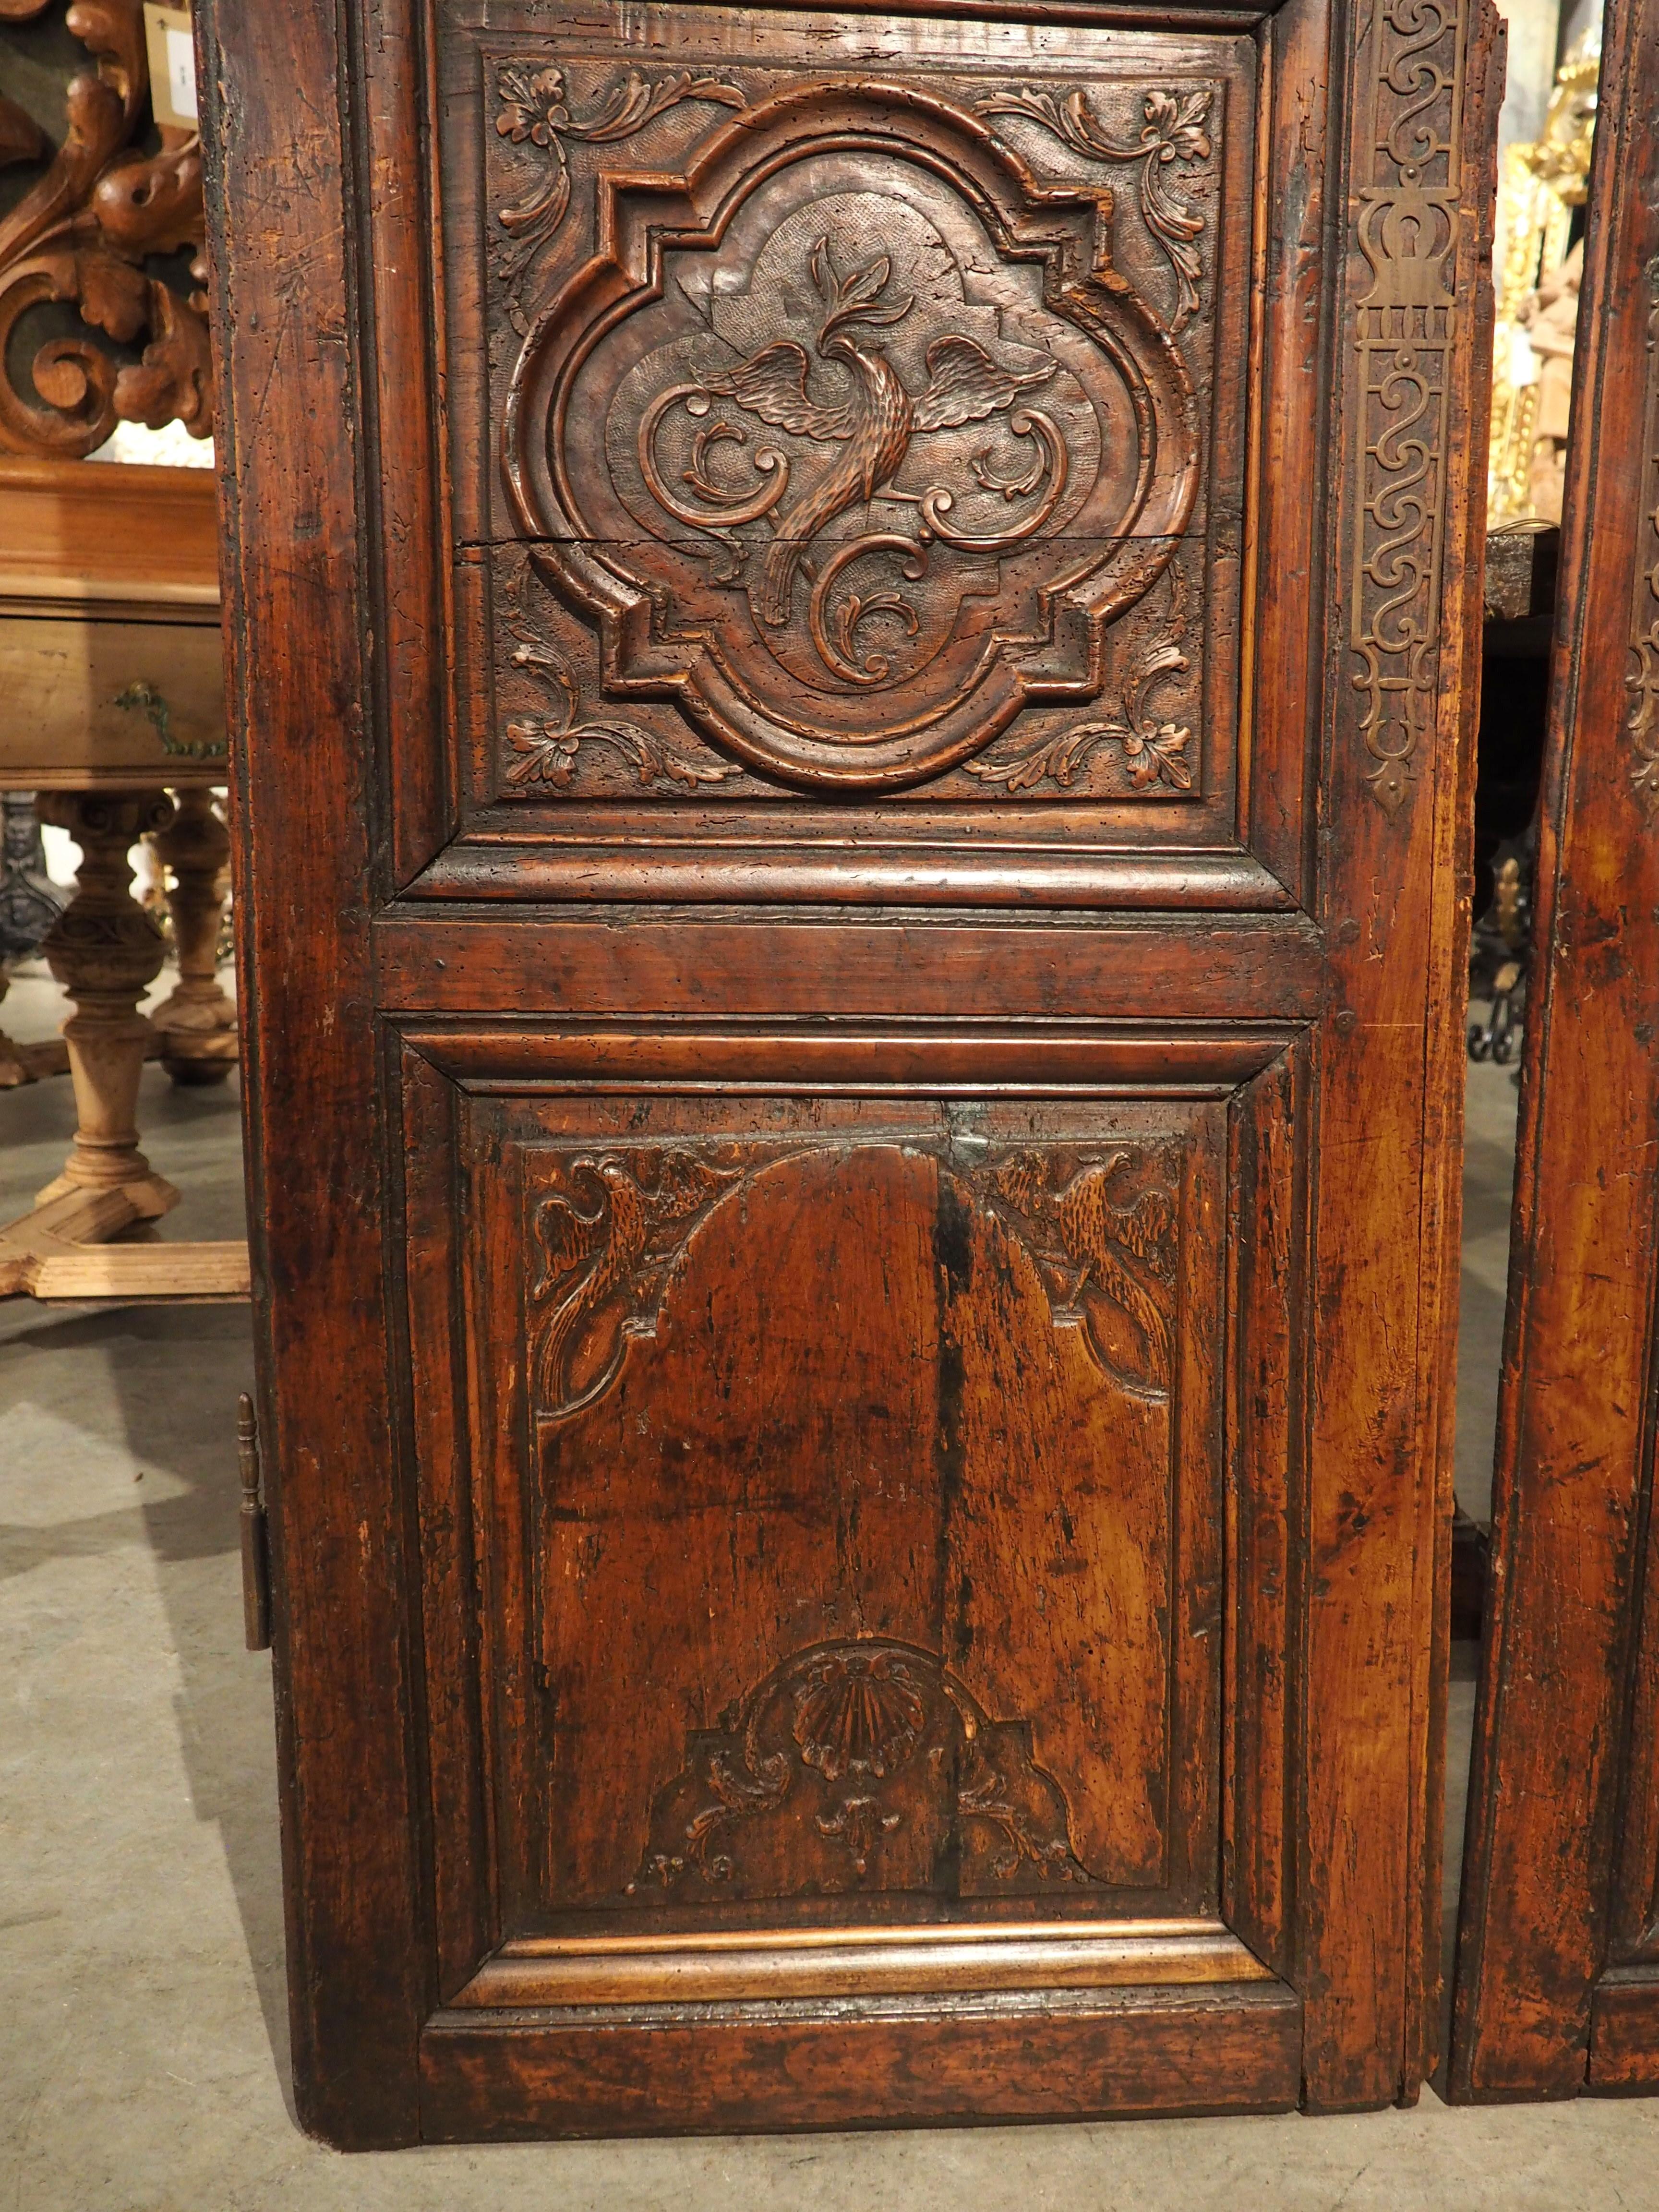 Originally carved in Rennes, France, circa 1720, these avian and foliate-themed doors would have graced the front of a period Regence cherry wood armoire. Both doors have been carved with three panels surrounded by thick molding. Several